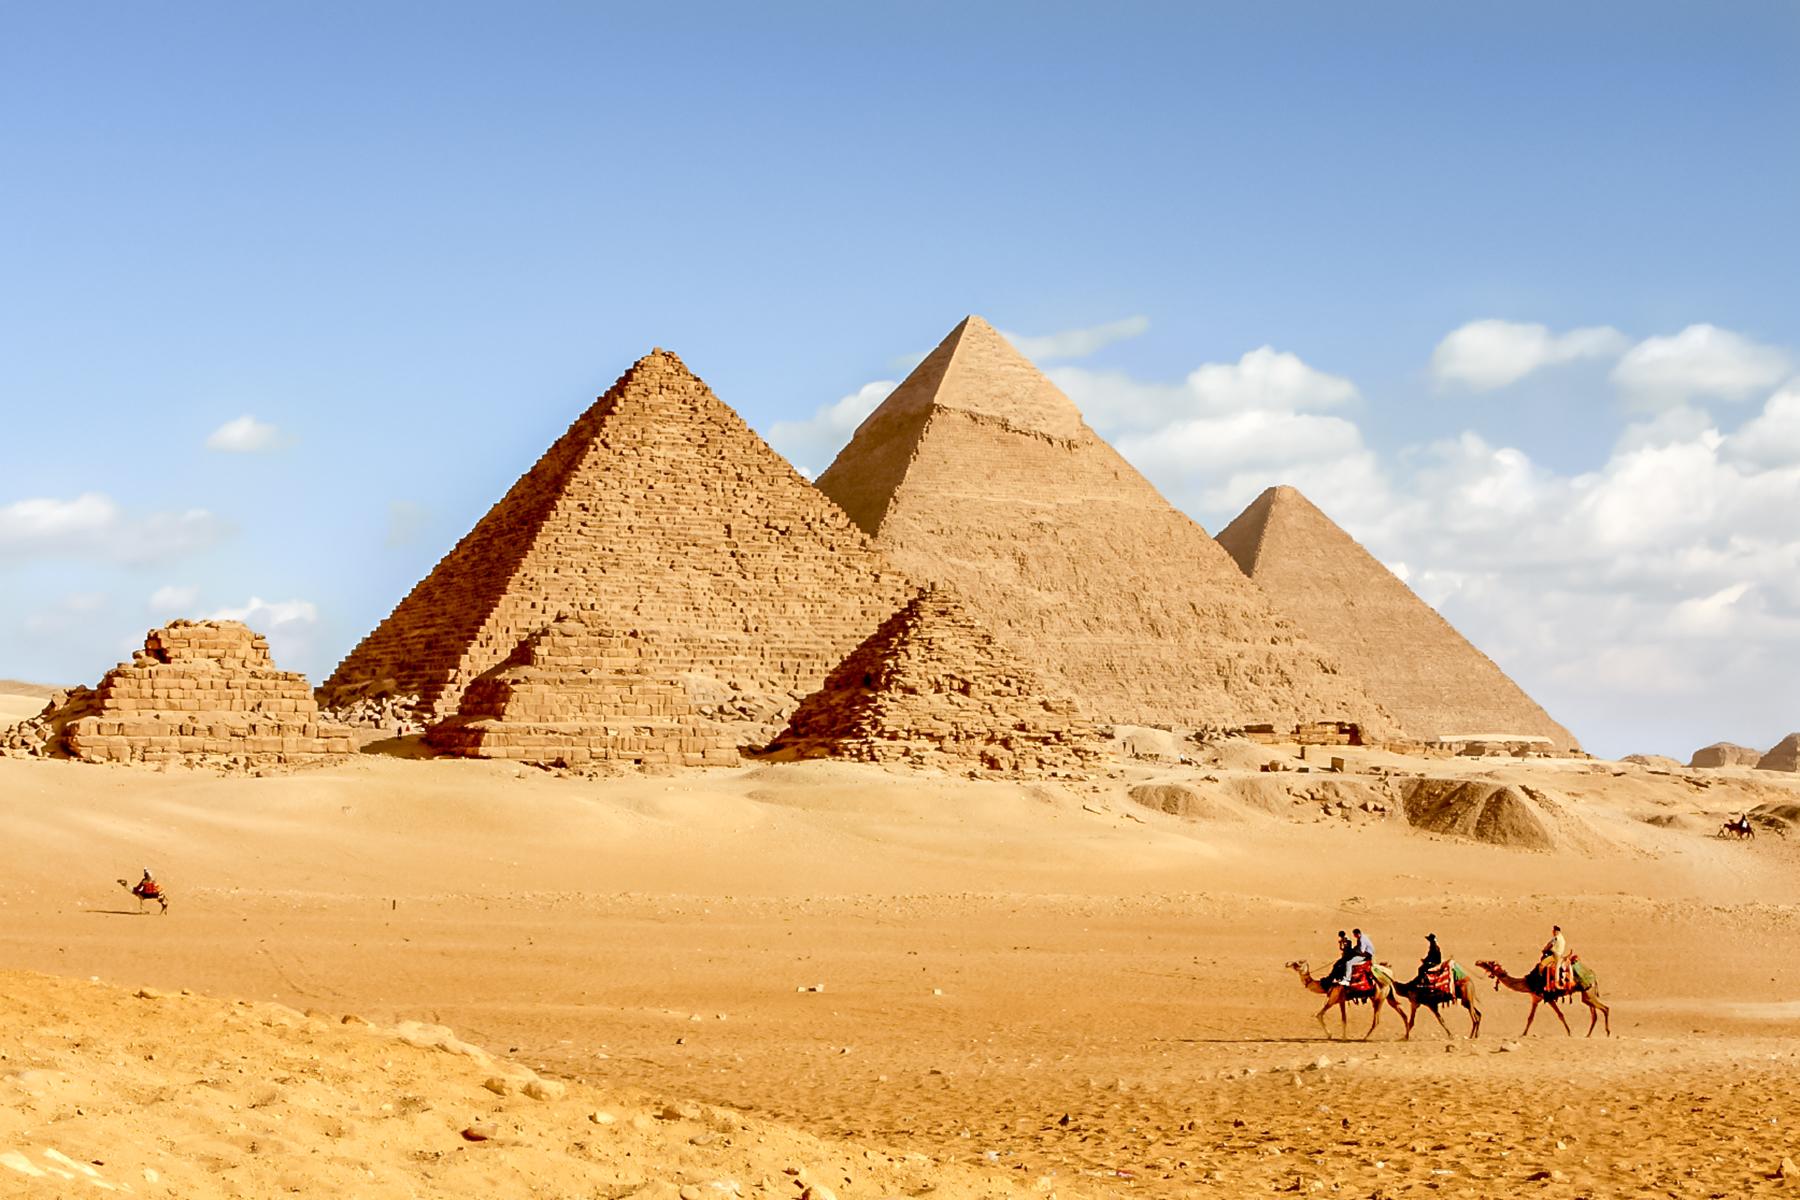 what is the most popular tourist attraction in egypt